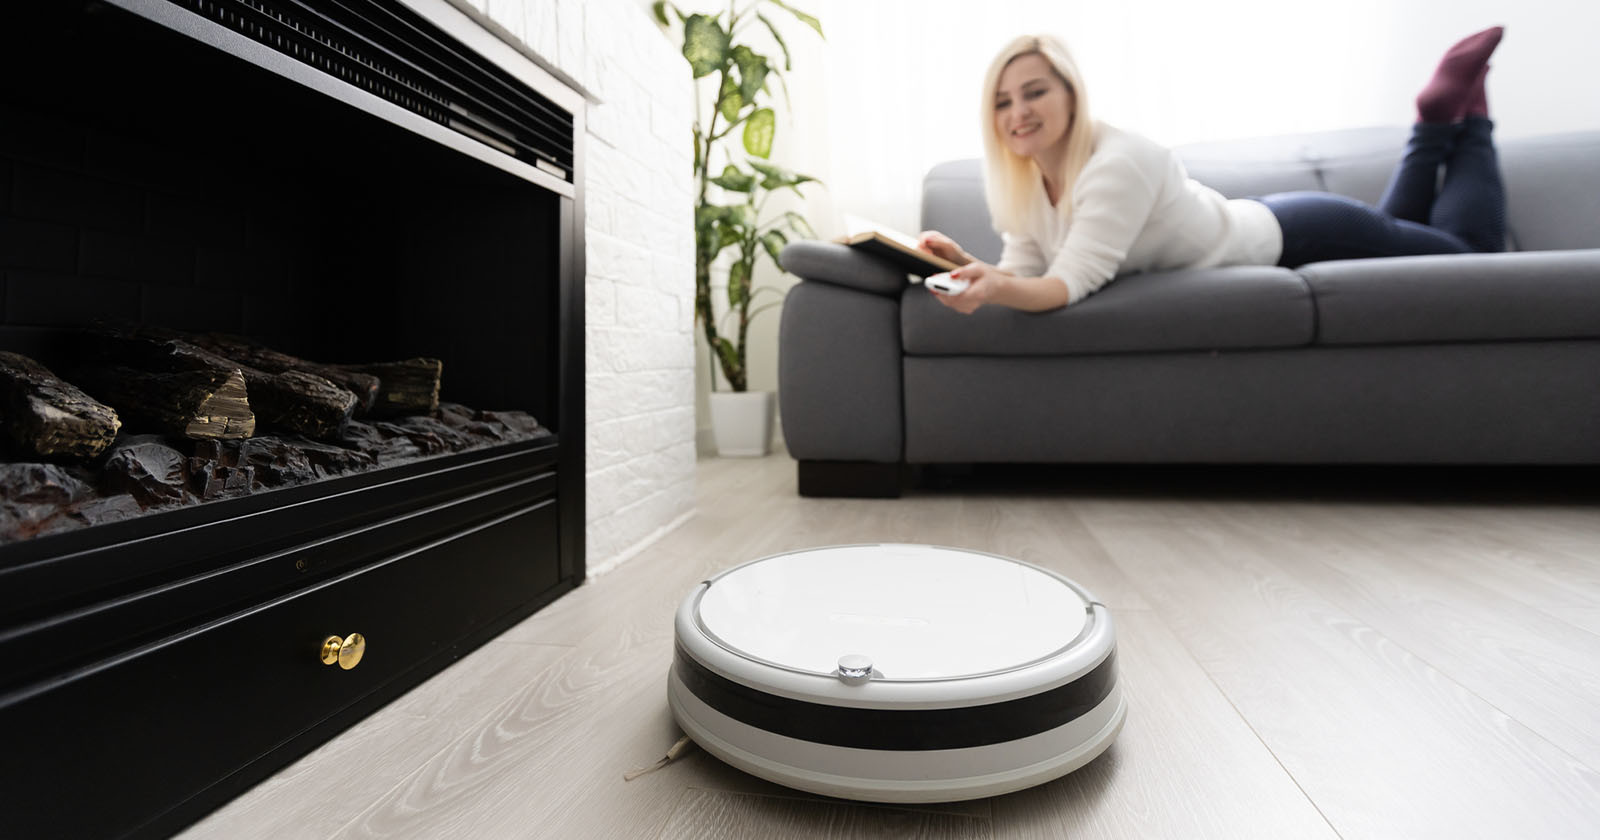 Robot Vacuum Took Photo of Woman on Toilet That Was Shared on Facebook